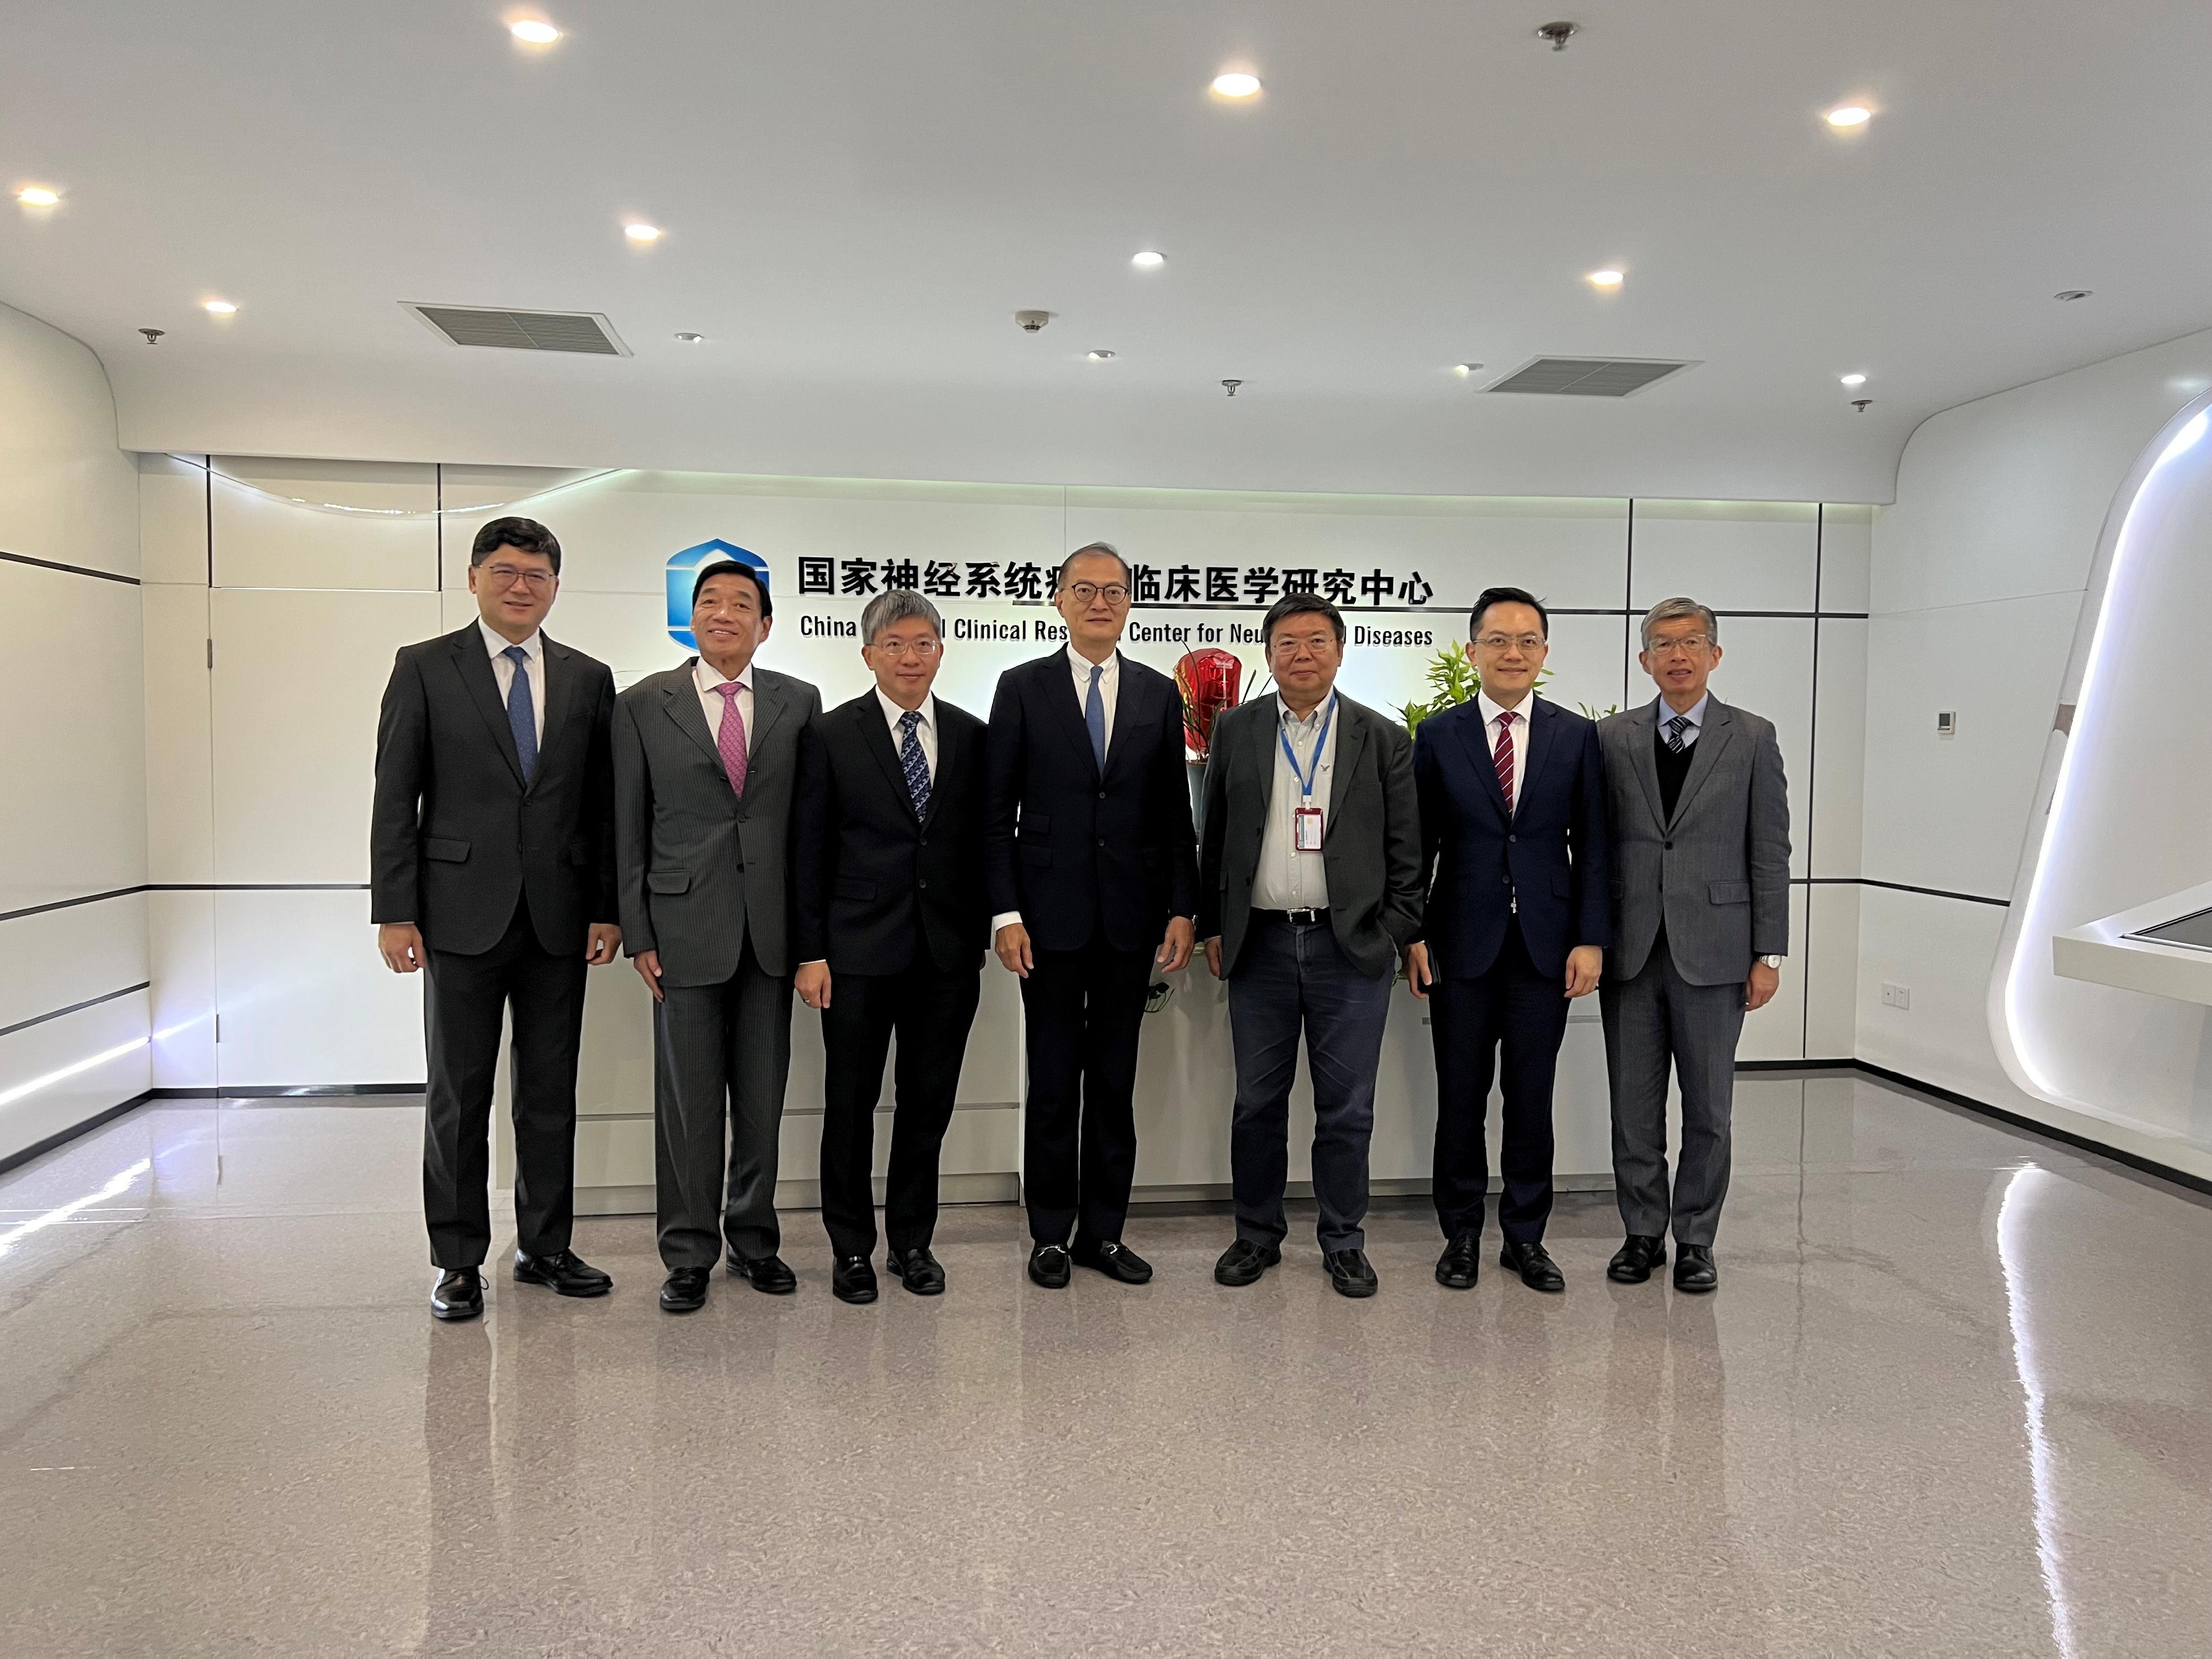 The Secretary for Health, Professor Lo Chung-mau, visited Beijing Tiantan Hospital affiliated to Capital Medical University this morning (November 6). Photo shows Professor Lo (centre) and his delegation, including the Permanent Secretary for Health, Mr Thomas Chan (third left); the Director of Health, Dr Ronald Lam (second right); the Chairman of the Hospital Authority (HA), Mr Henry Fan (second left); and the Chief Executive of the HA, Dr Tony Ko (first left), visiting the China National Clinical Research Center for Neurological Diseases located at the hospital.